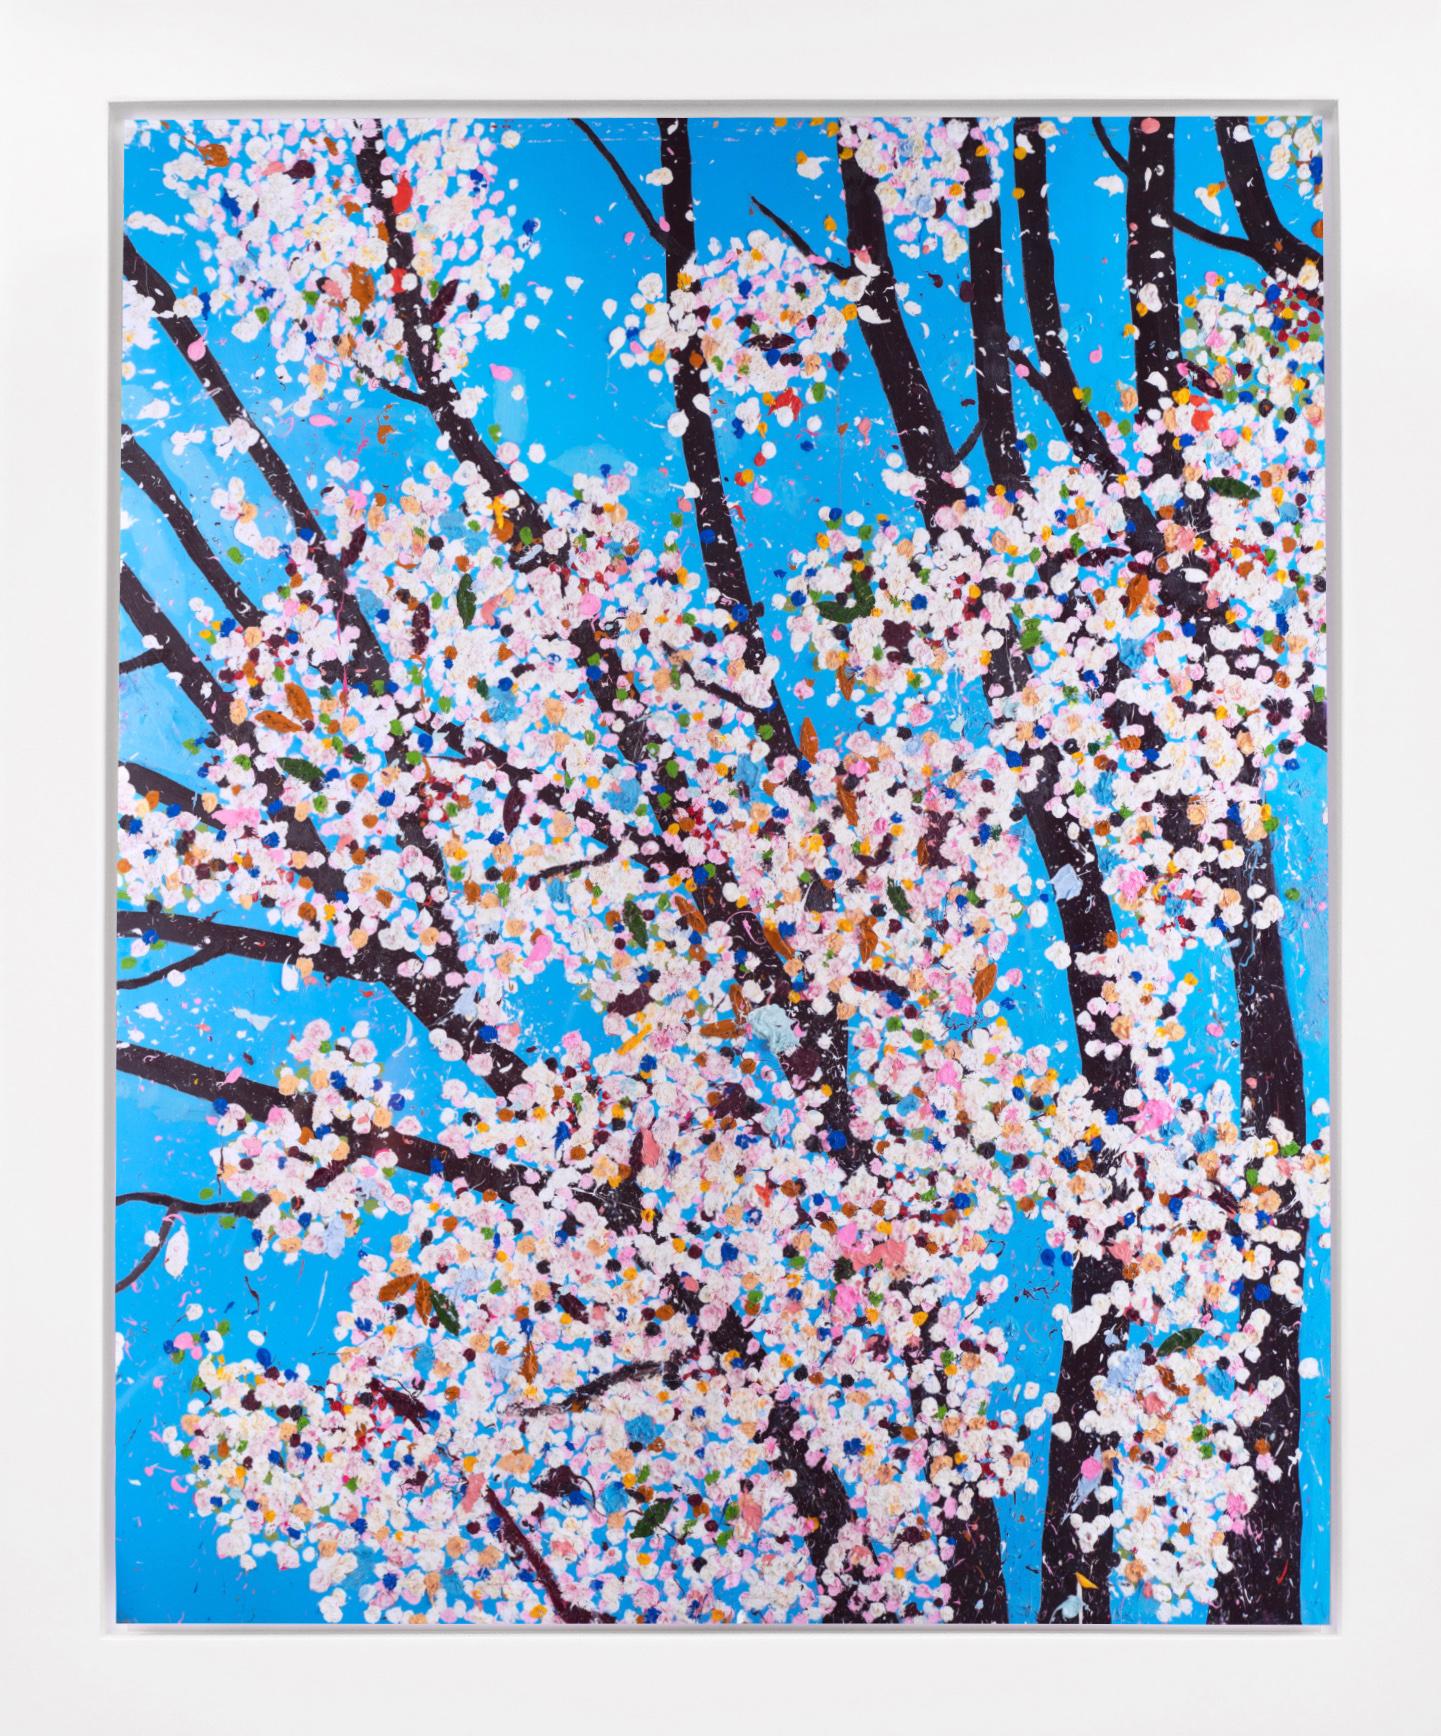 Damien Hirst Abstract Print - The Virtues 'Justice', Limited Edition 'Cherry Blossom' Landscape